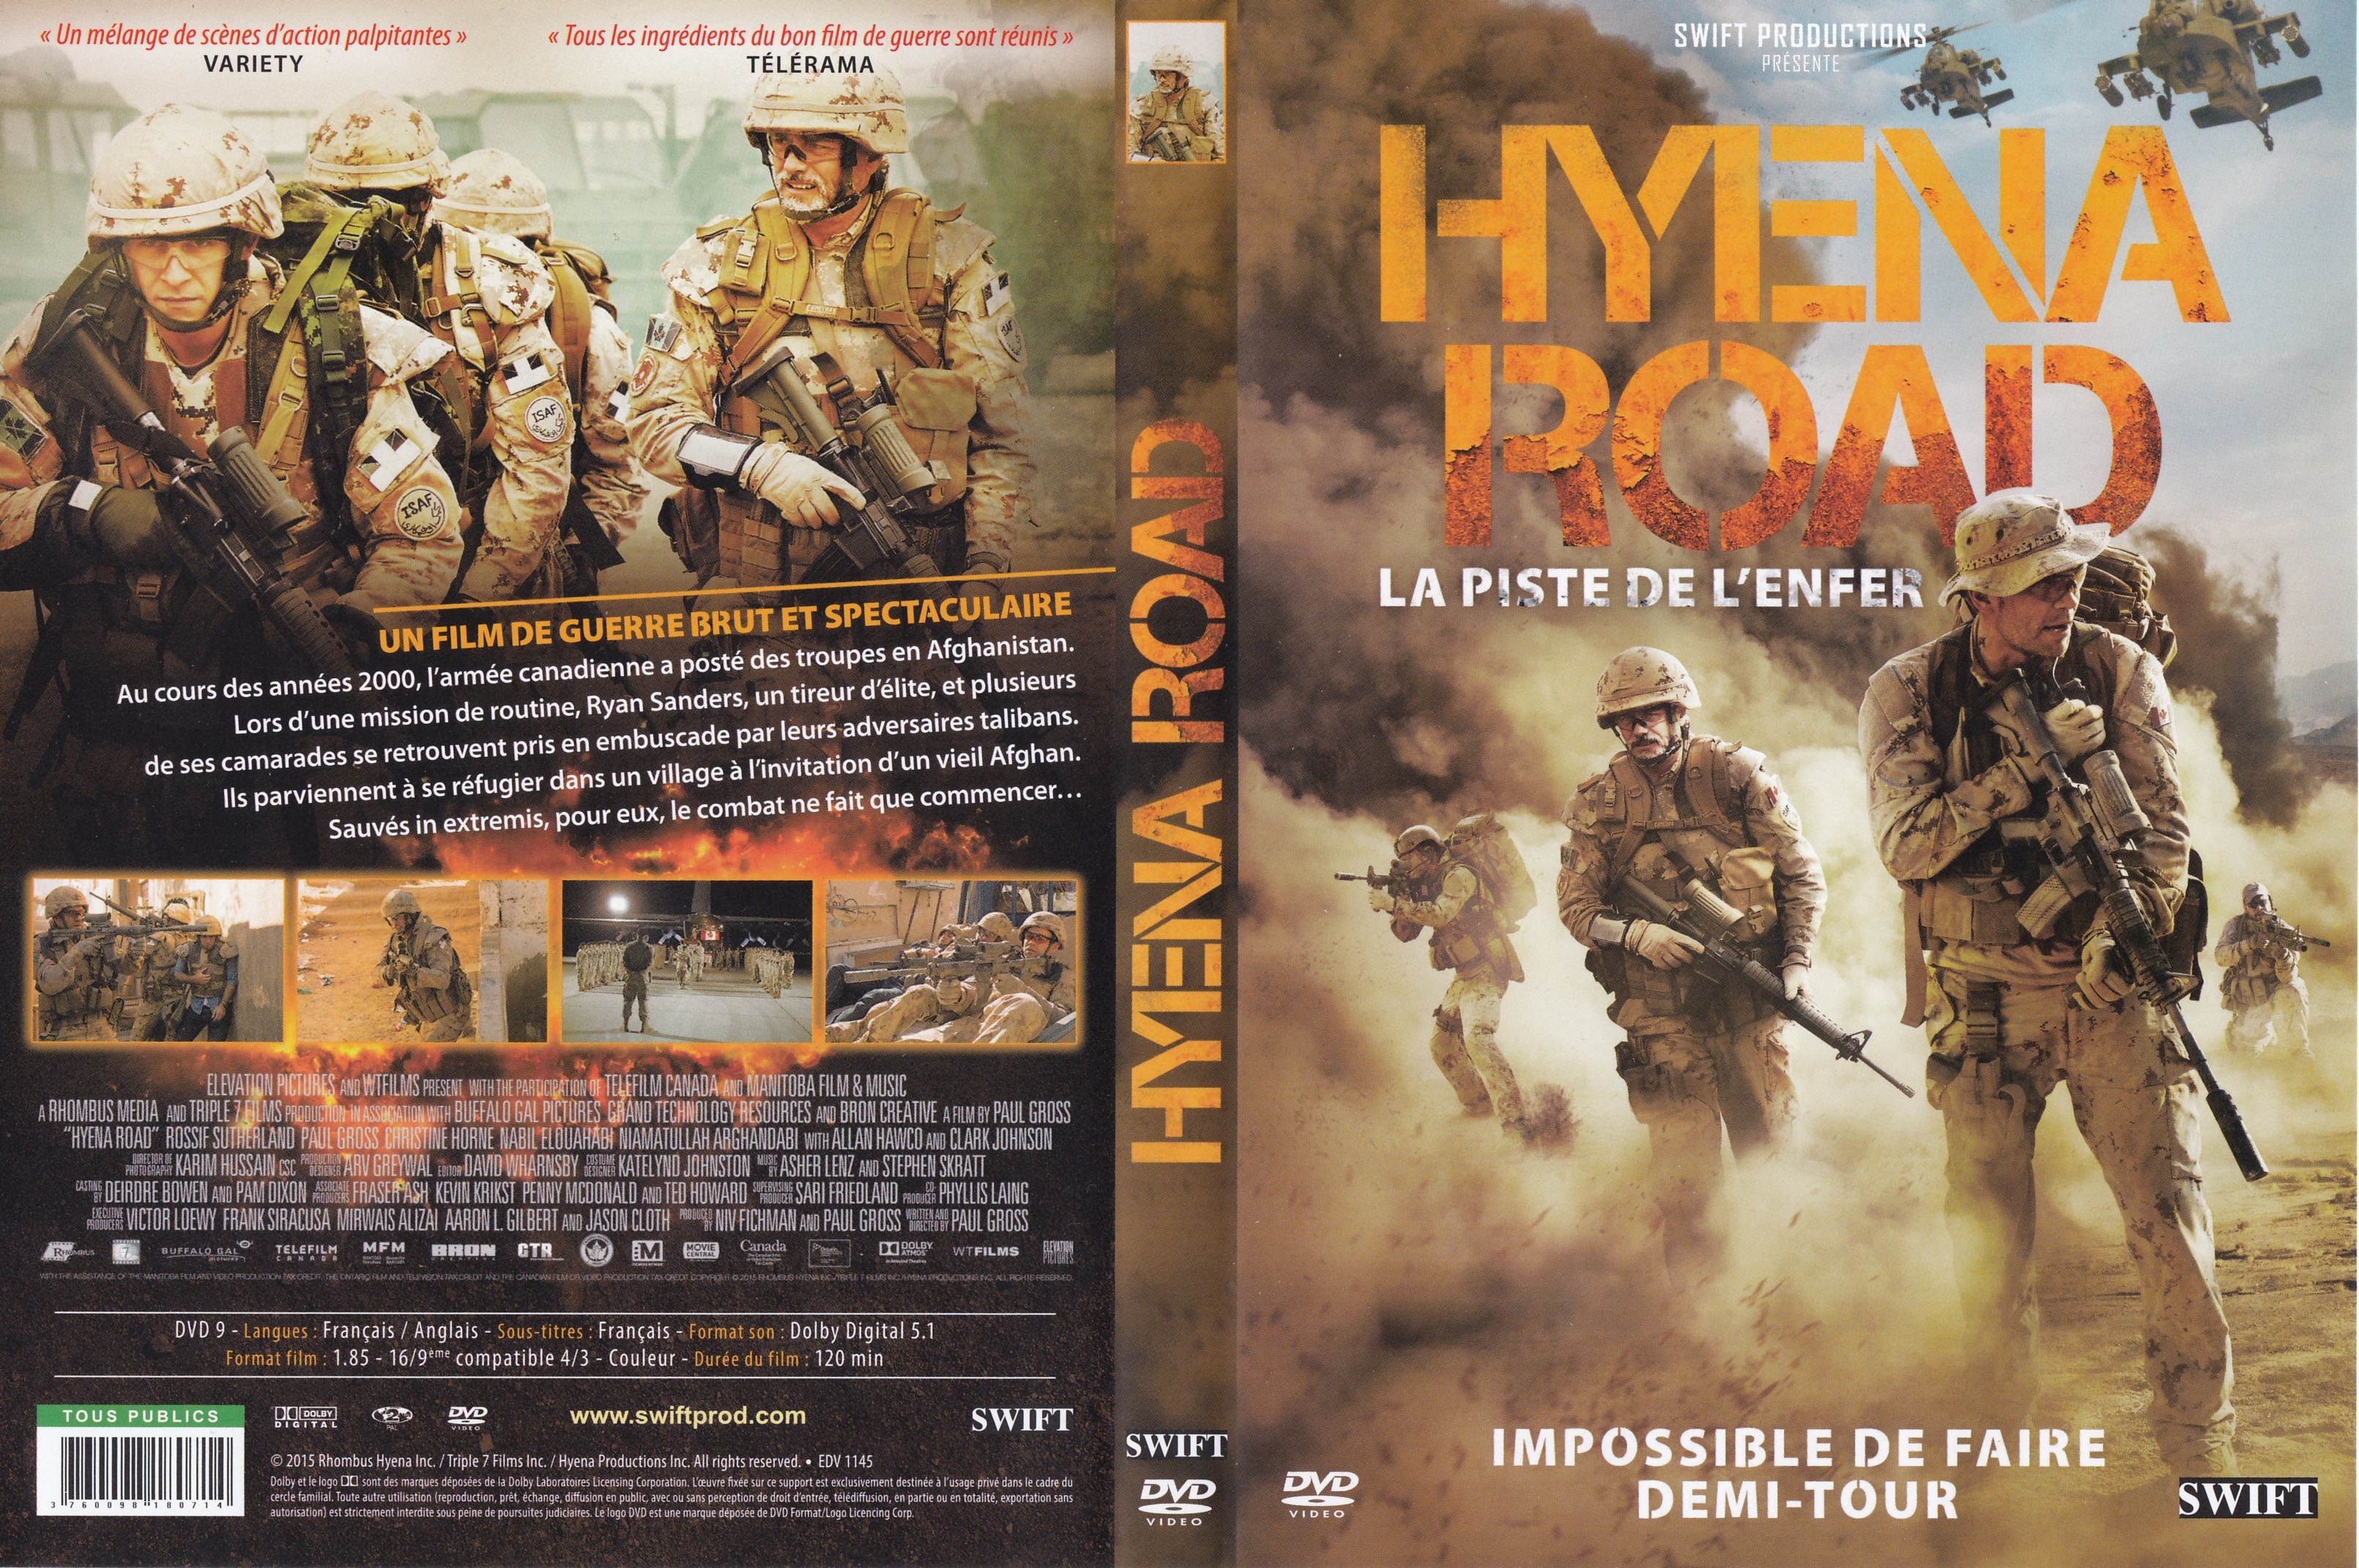 Jaquette DVD Hyena Road